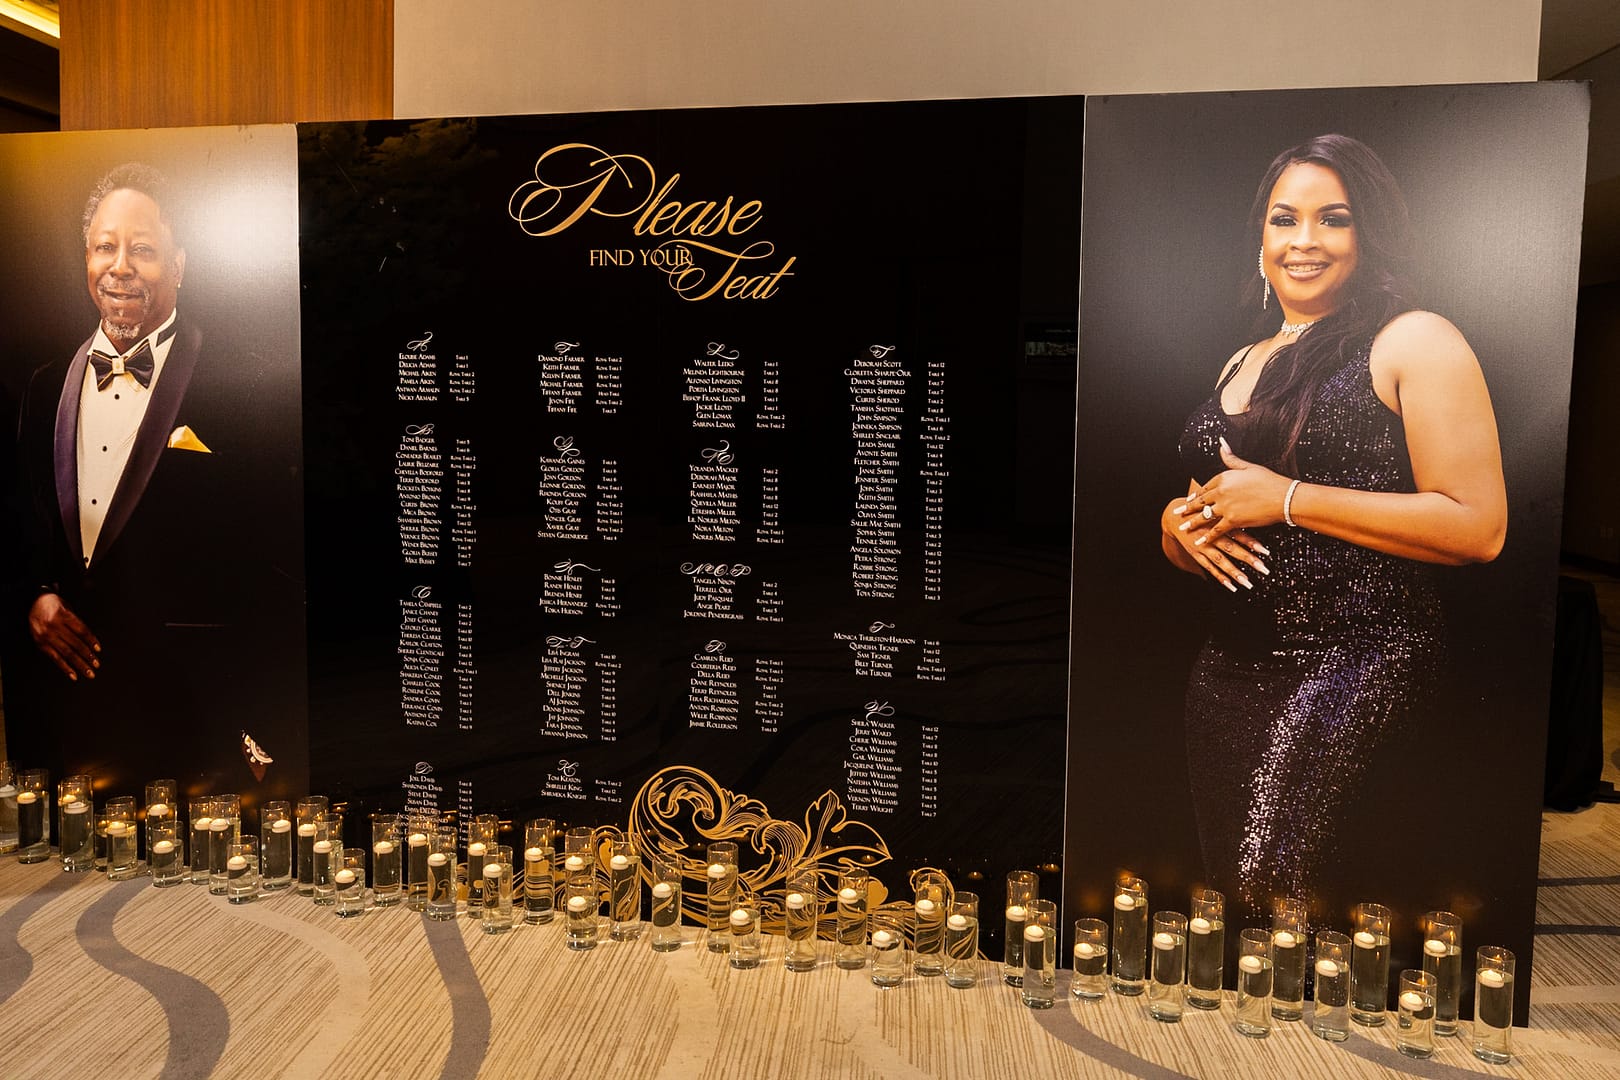 Black and Gold Seating Chart with Floating Candle Wedding Decor and Portraits of the Couple